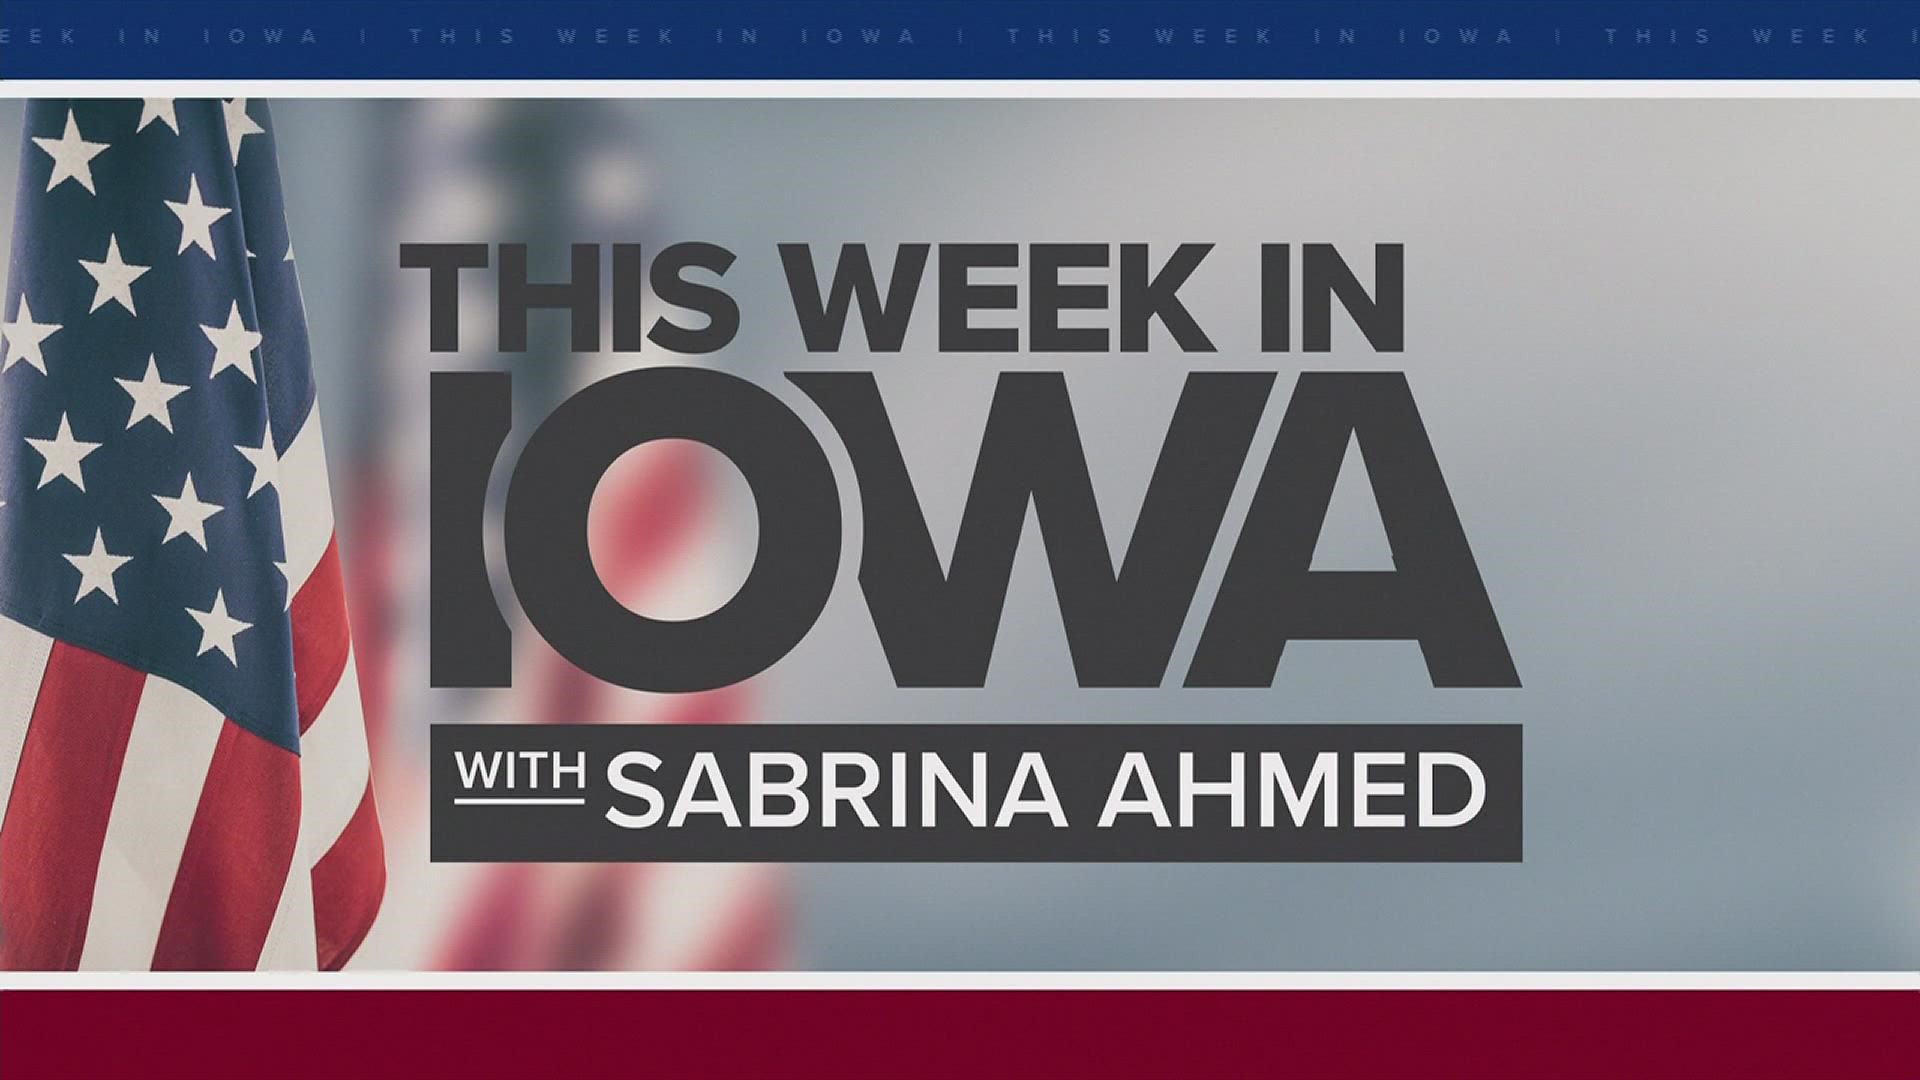 Local 5's Sabrina Ahmed discusses the redistricting maps approved by state lawmakers and sits down with Gov. Kim Reynolds to discuss economic and border policy.